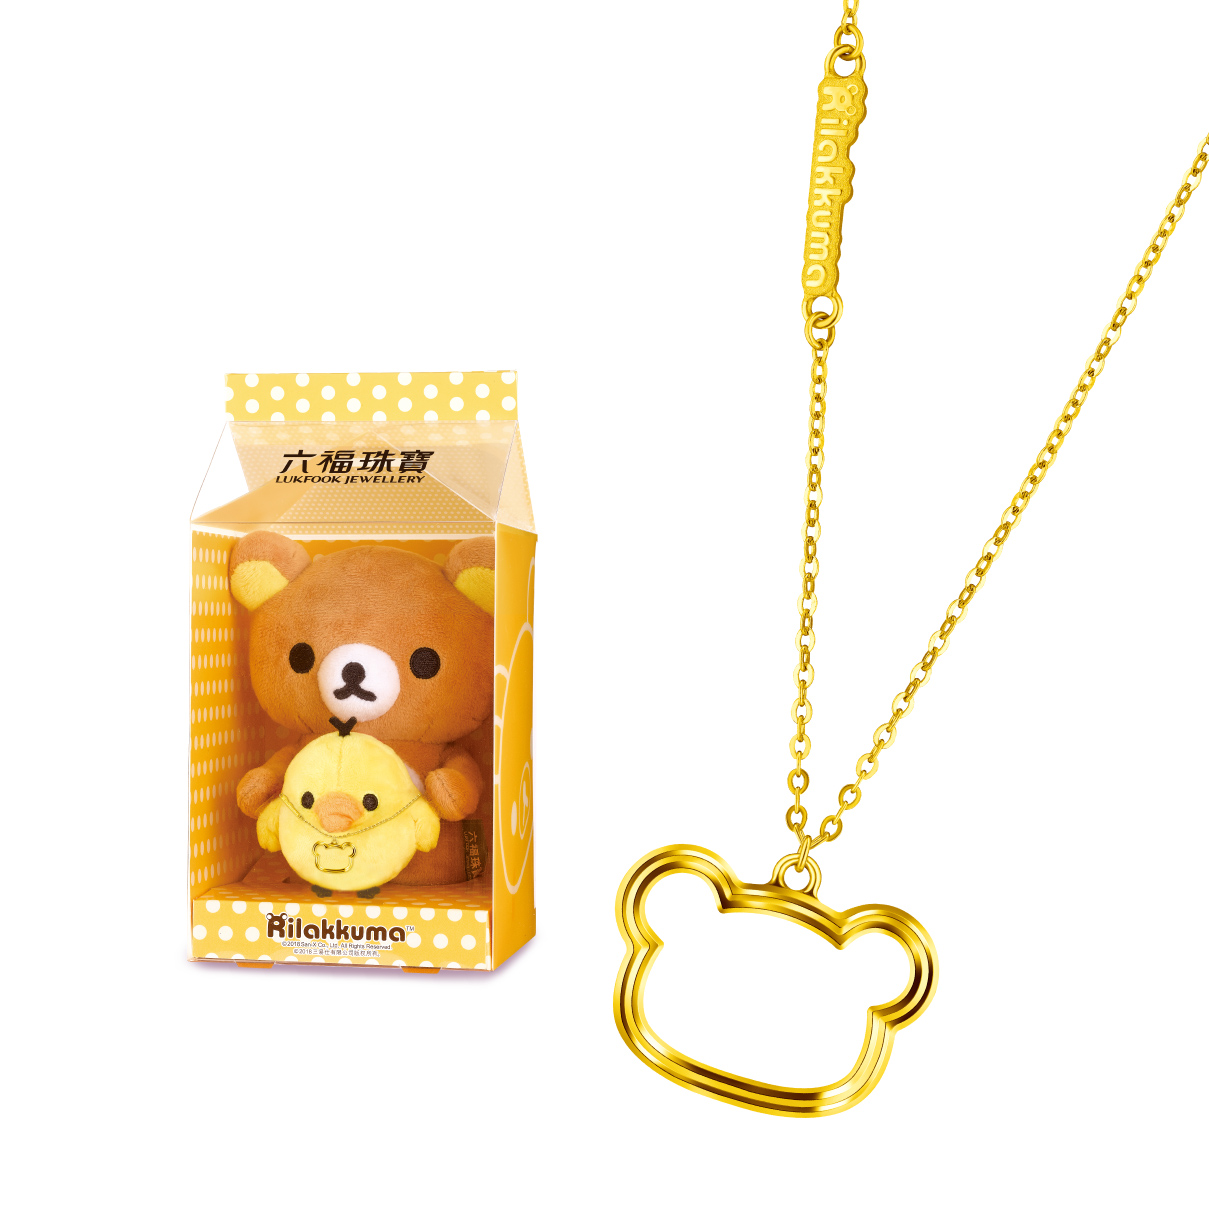 Rilakkuma™ Collection Light of Gold Necklace and Cashbox Gift Set